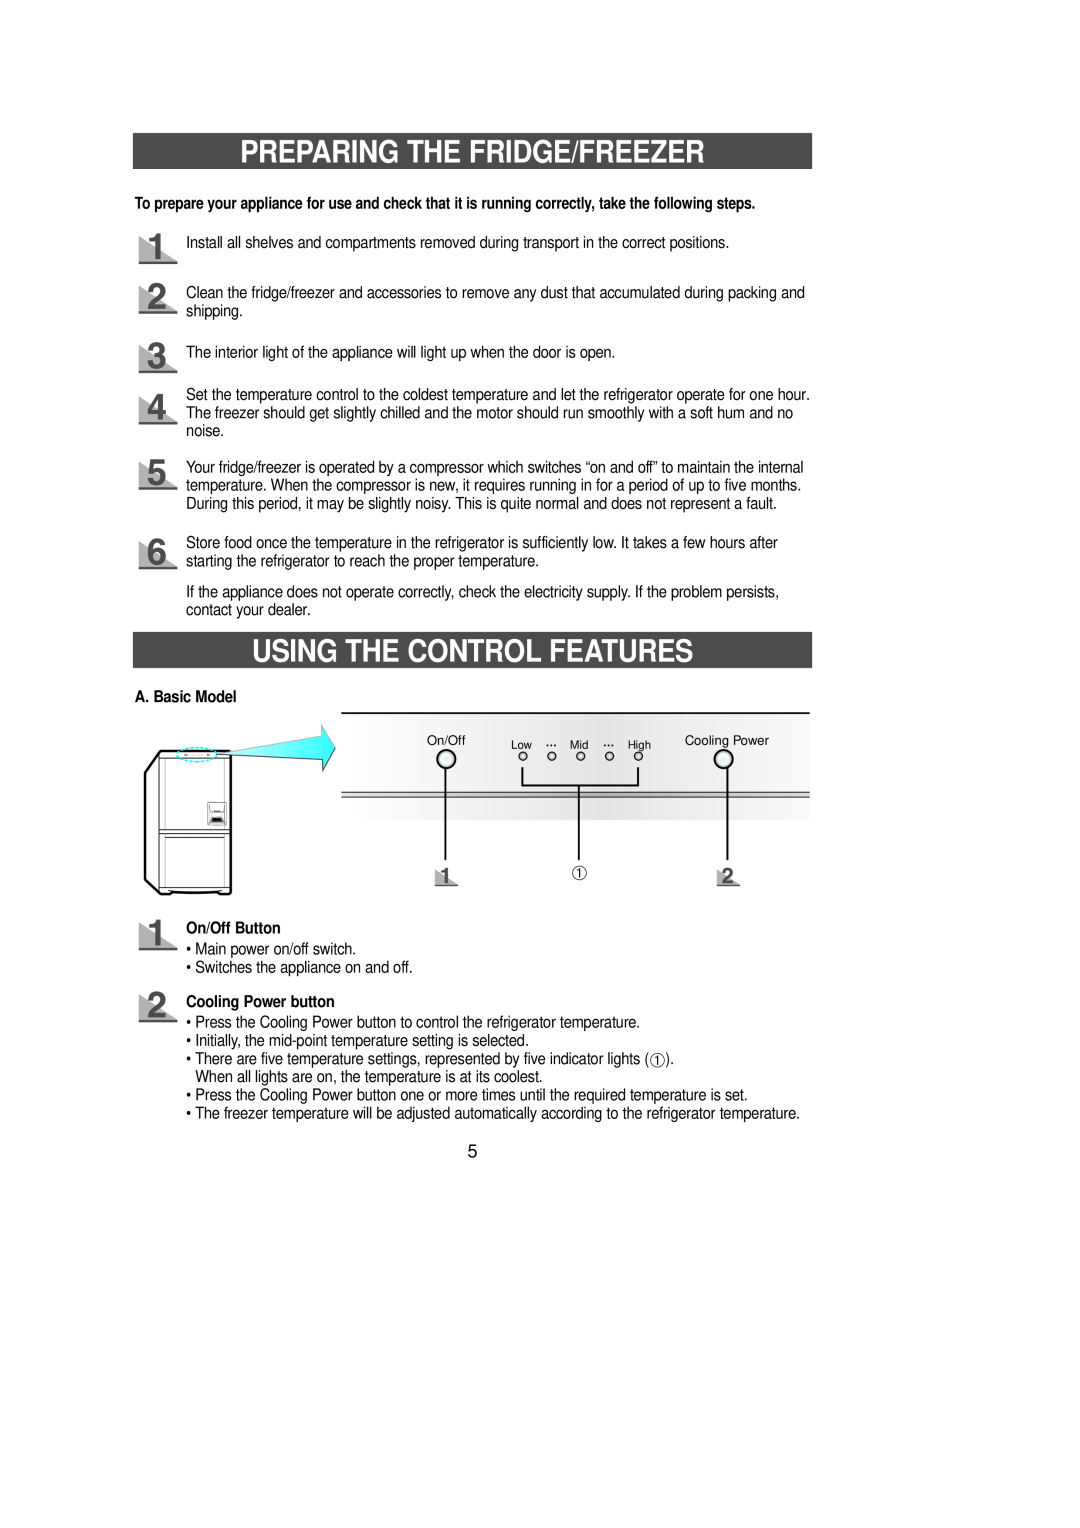 Samsung DA68-01281A manual Preparing The Fridge/Freezer, Using The Control Features, A. Basic Model, On/Off Button 